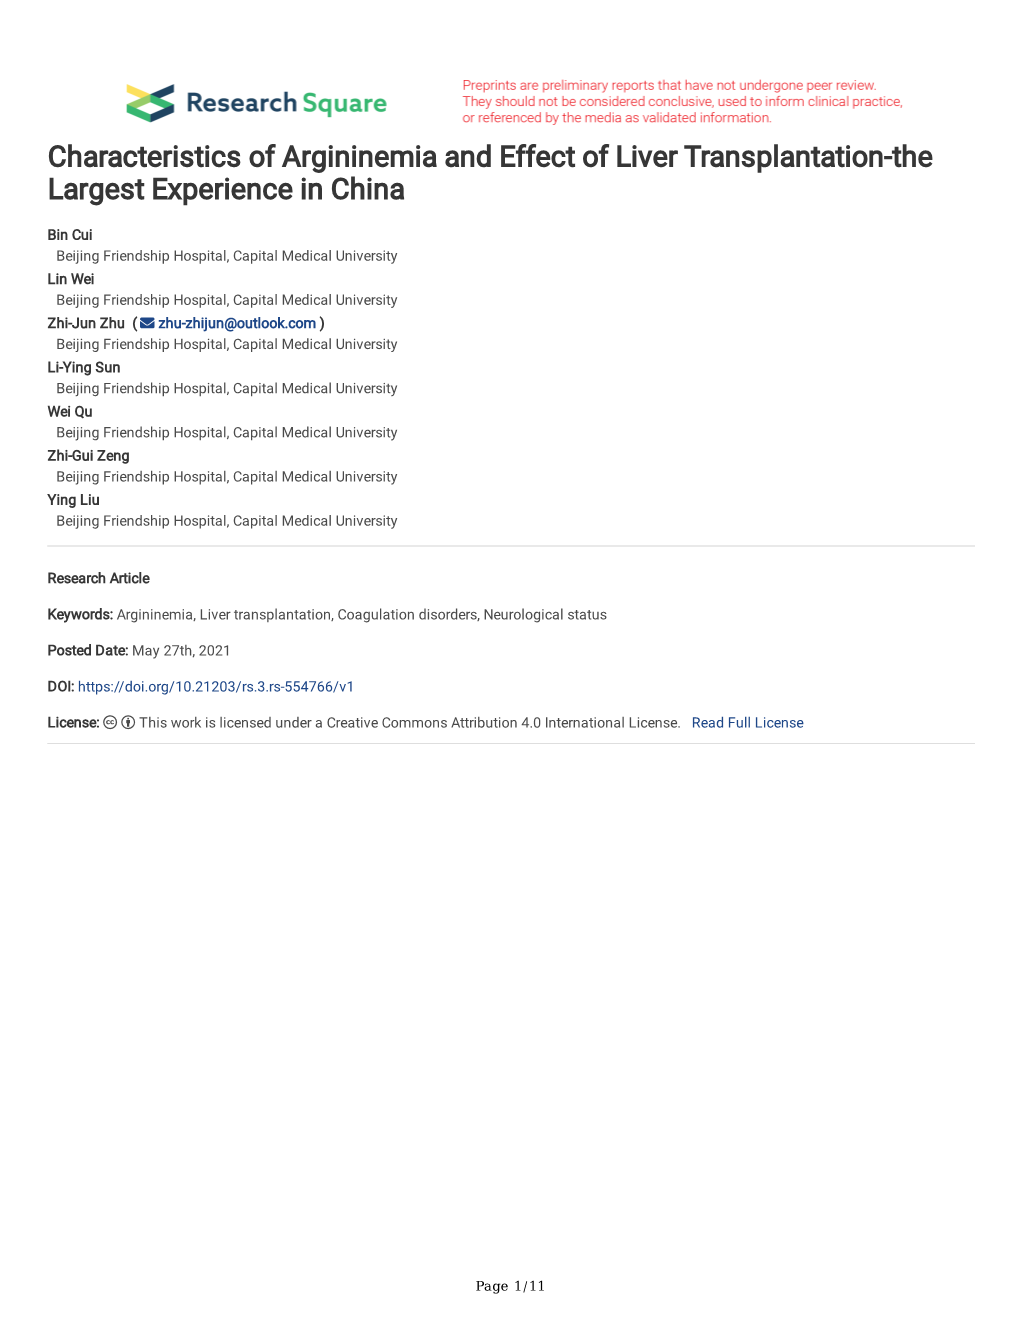 Characteristics of Argininemia and Effect of Liver Transplantation-The Largest Experience in China